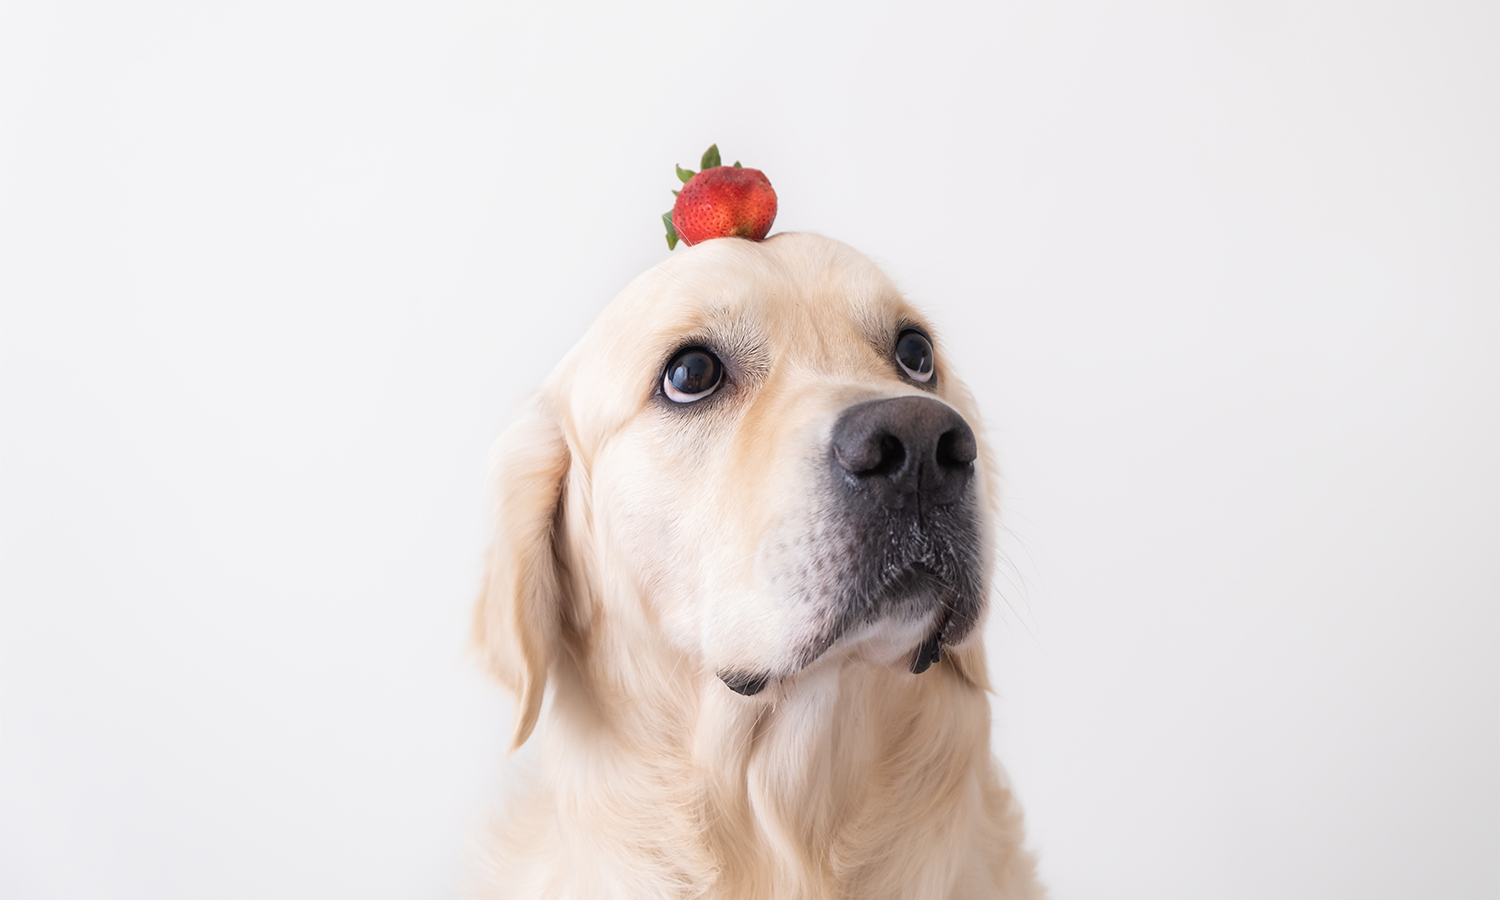 Can dogs eat strawberries and what are the cautions and risks of feeding strawberries to dog